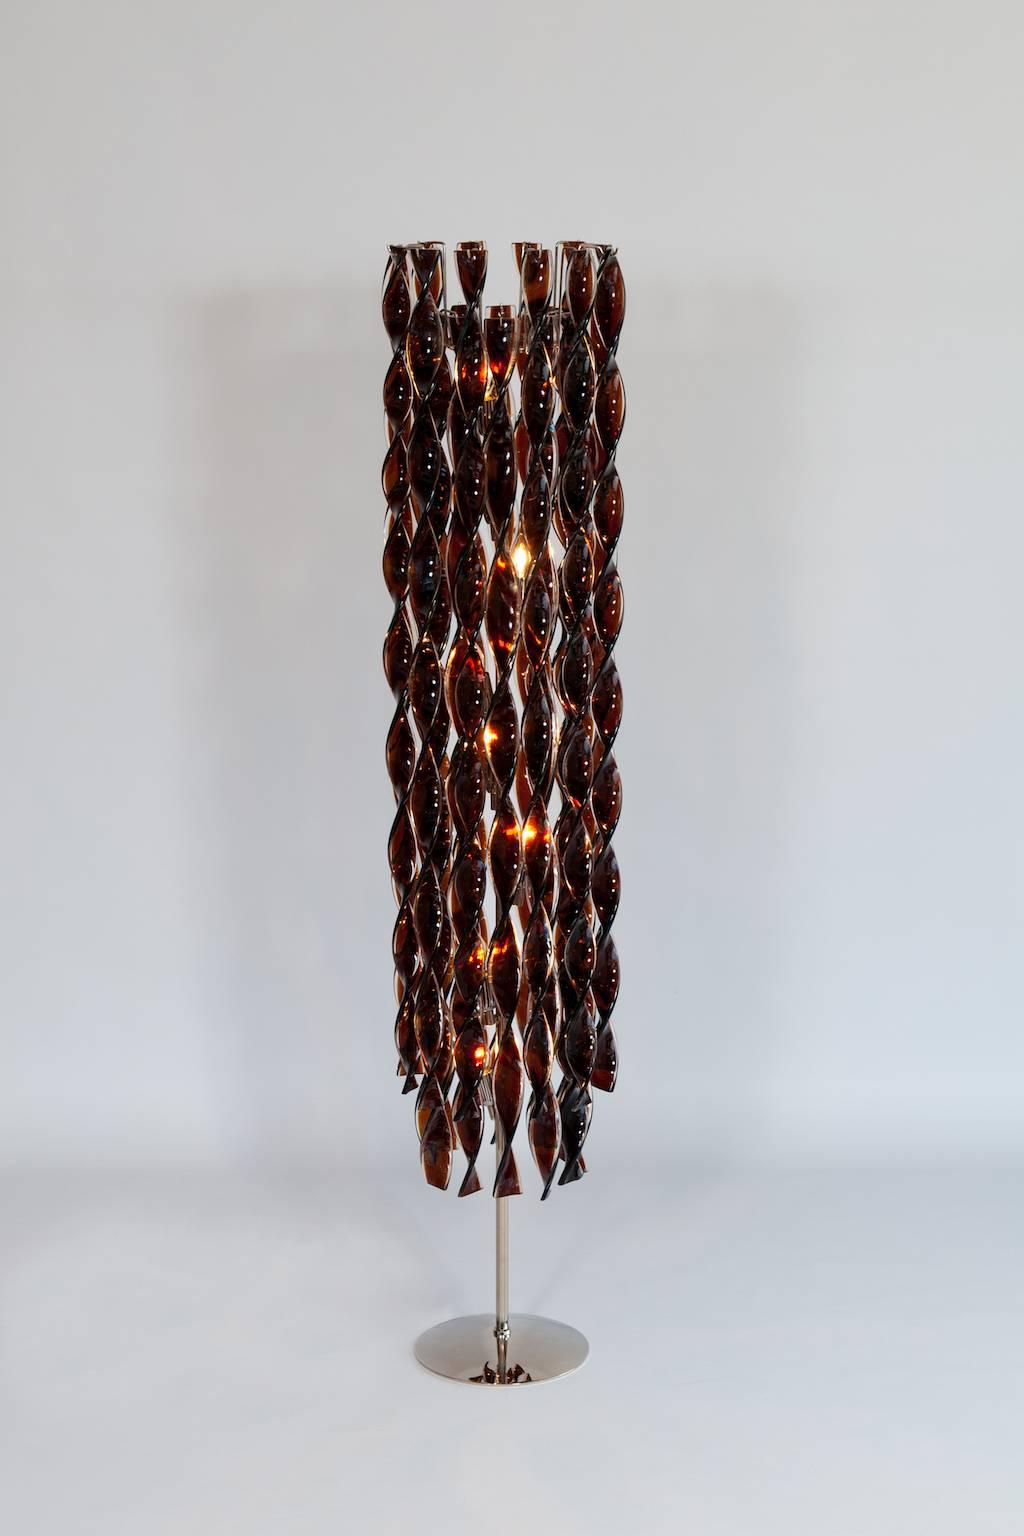 Italian Floor Lamp in Murano Glass with Twisted Tobacco-Colored Elements, 1980s For Sale 4